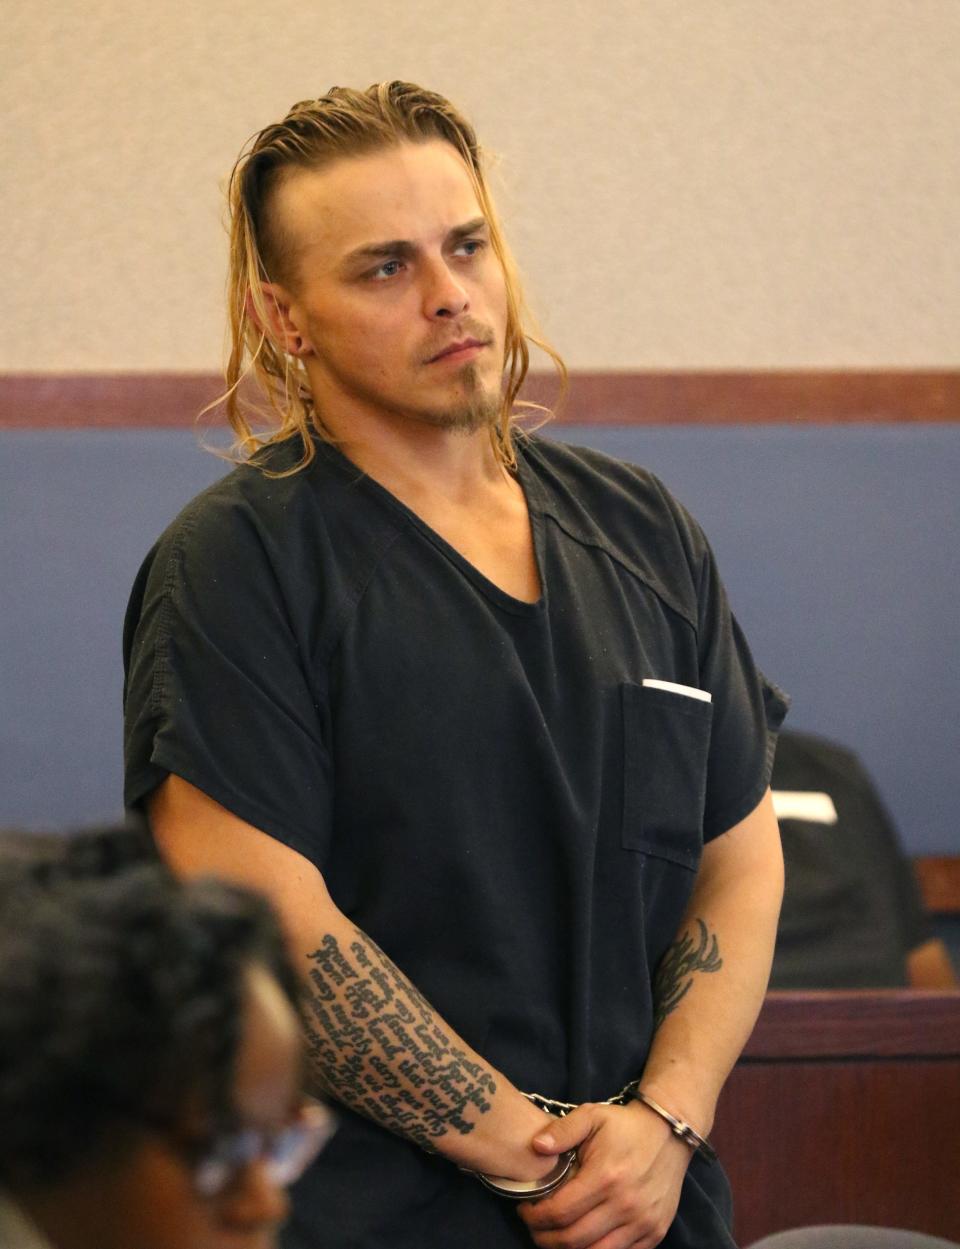 Corey Trumbull, charged in the slaying of an 11-year-old boy in Texas, appears in court at the Regional Justice Center on Thursday, March 5, 2020, in Las Vegas. Trumbull was arrested in Las Vegas after police responded to a call about a domestic violence attack on Boulder Highway on Feb. 25, 2020. (Bizuayehu Tesfaye/Las Vegas Review-Journal) @bizutesfaye